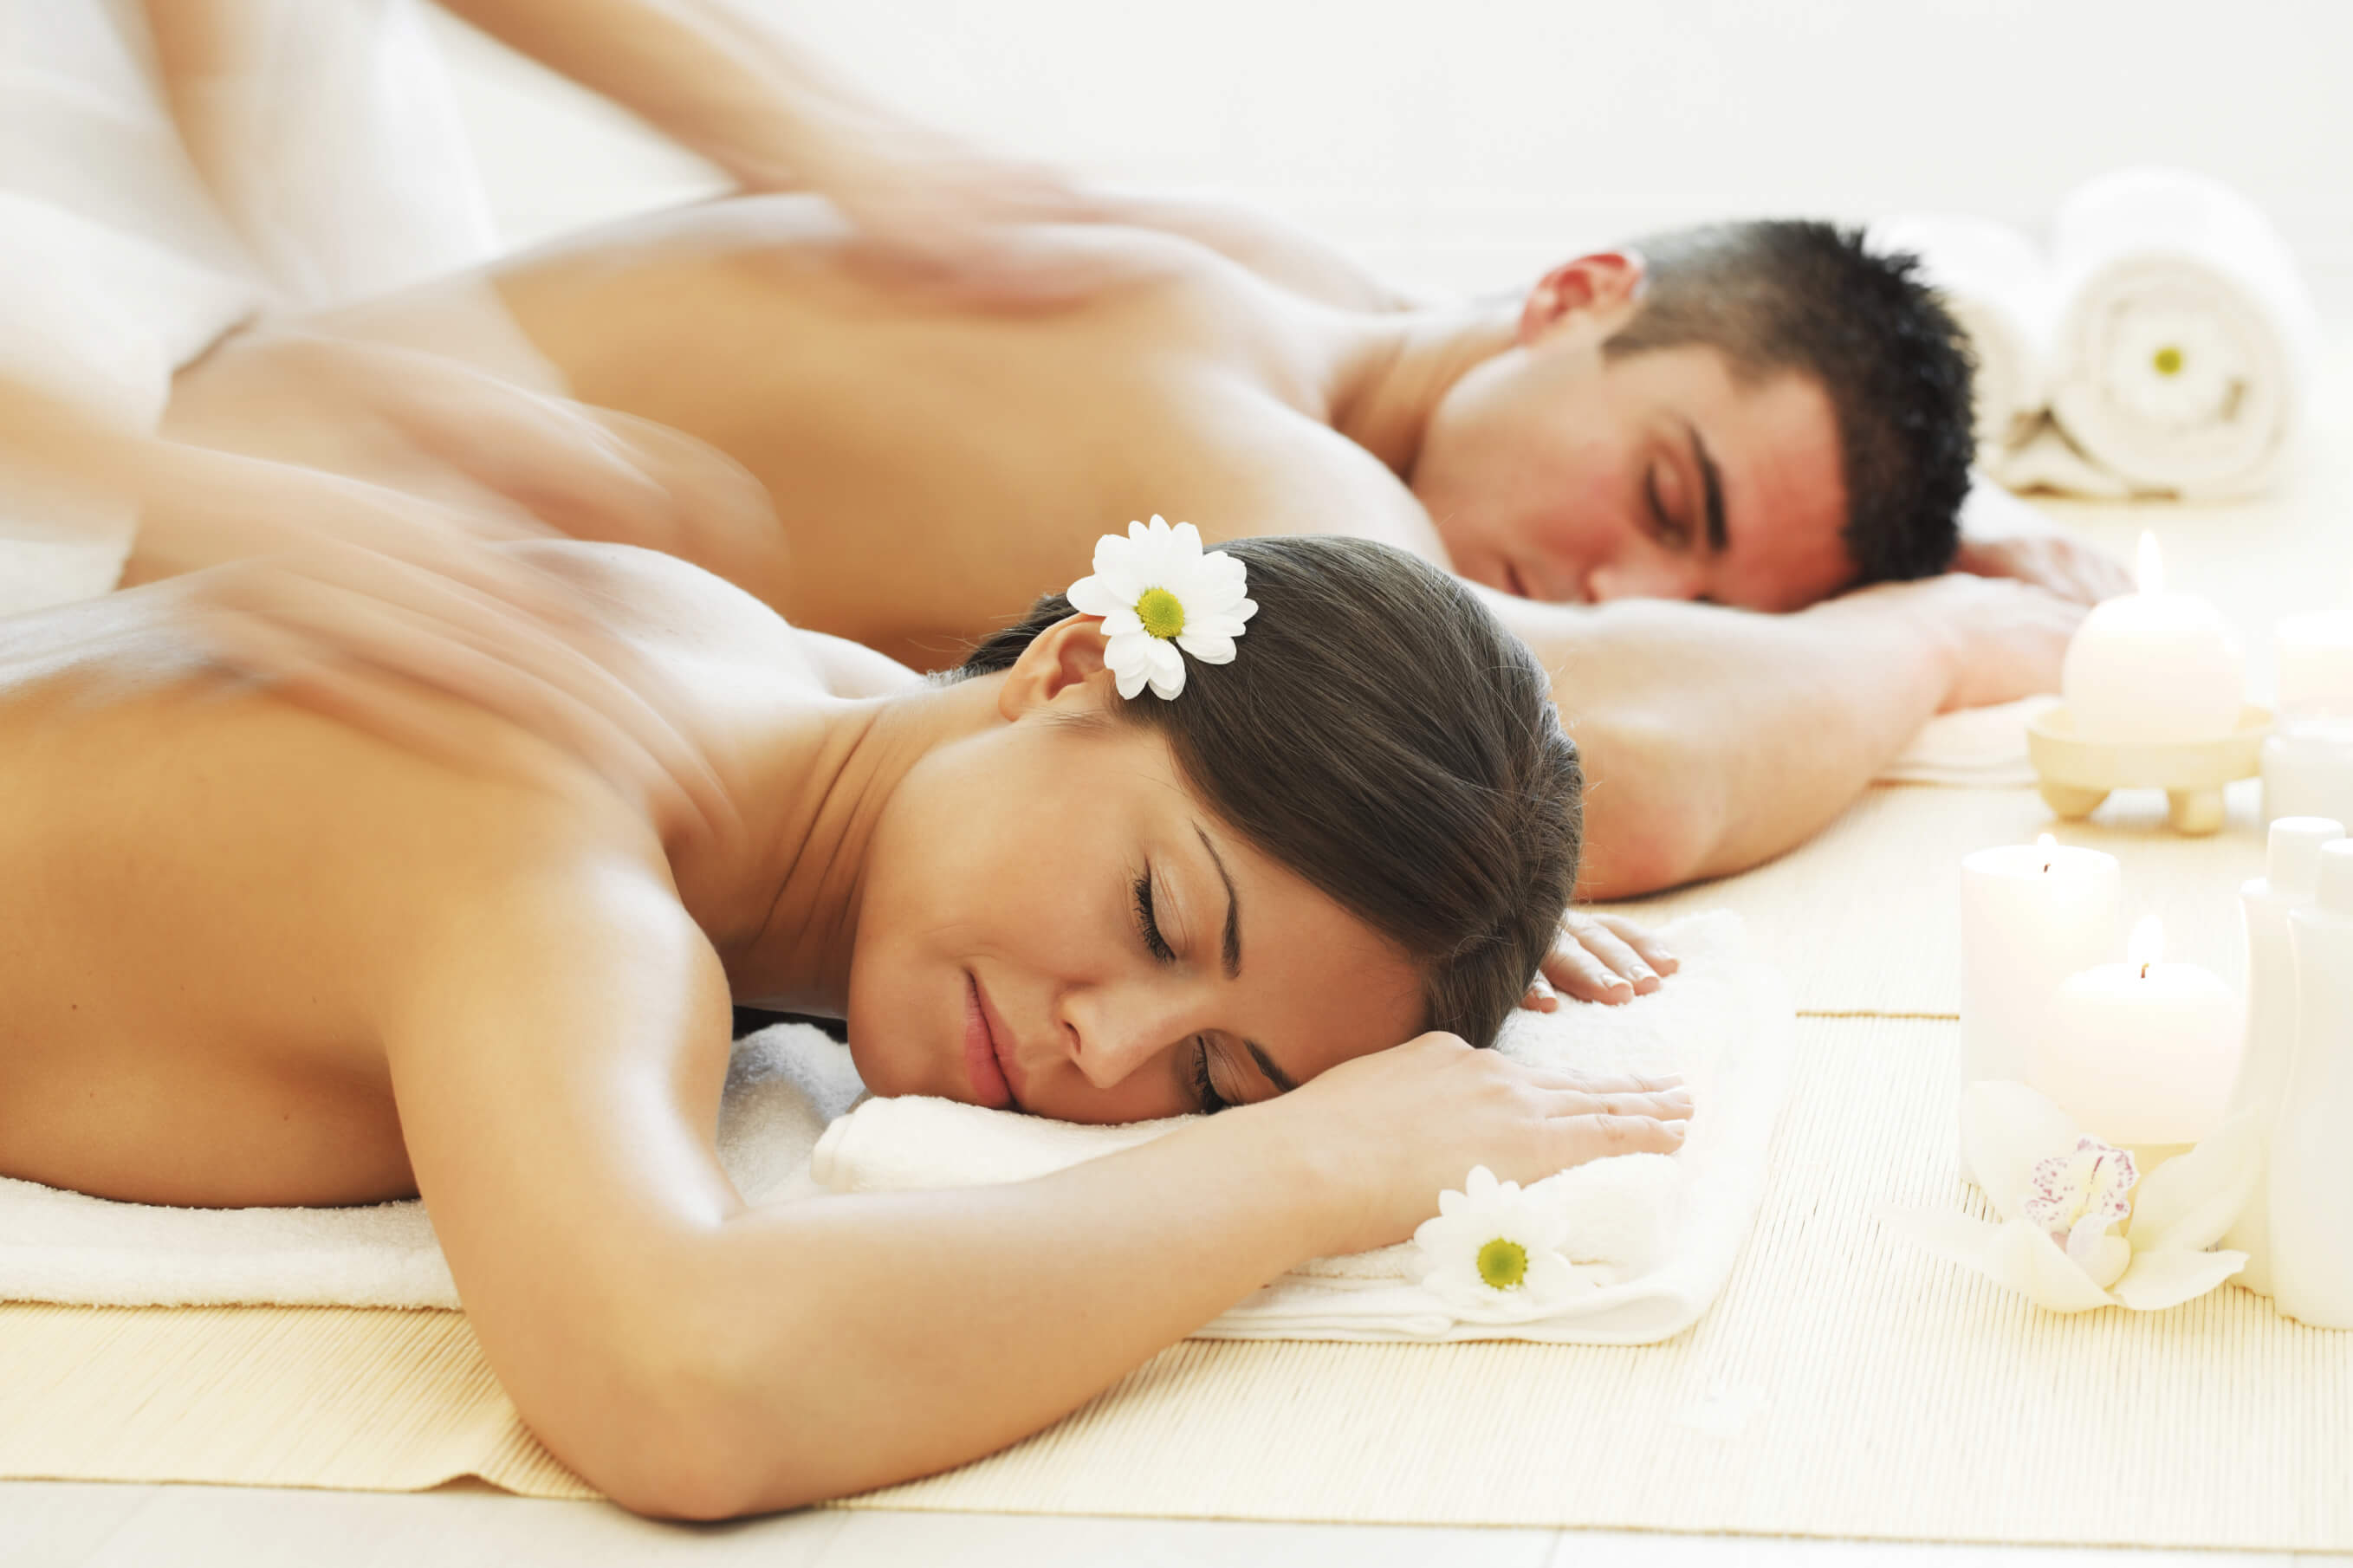 Personalize Your Therapeutic Massage Treatments